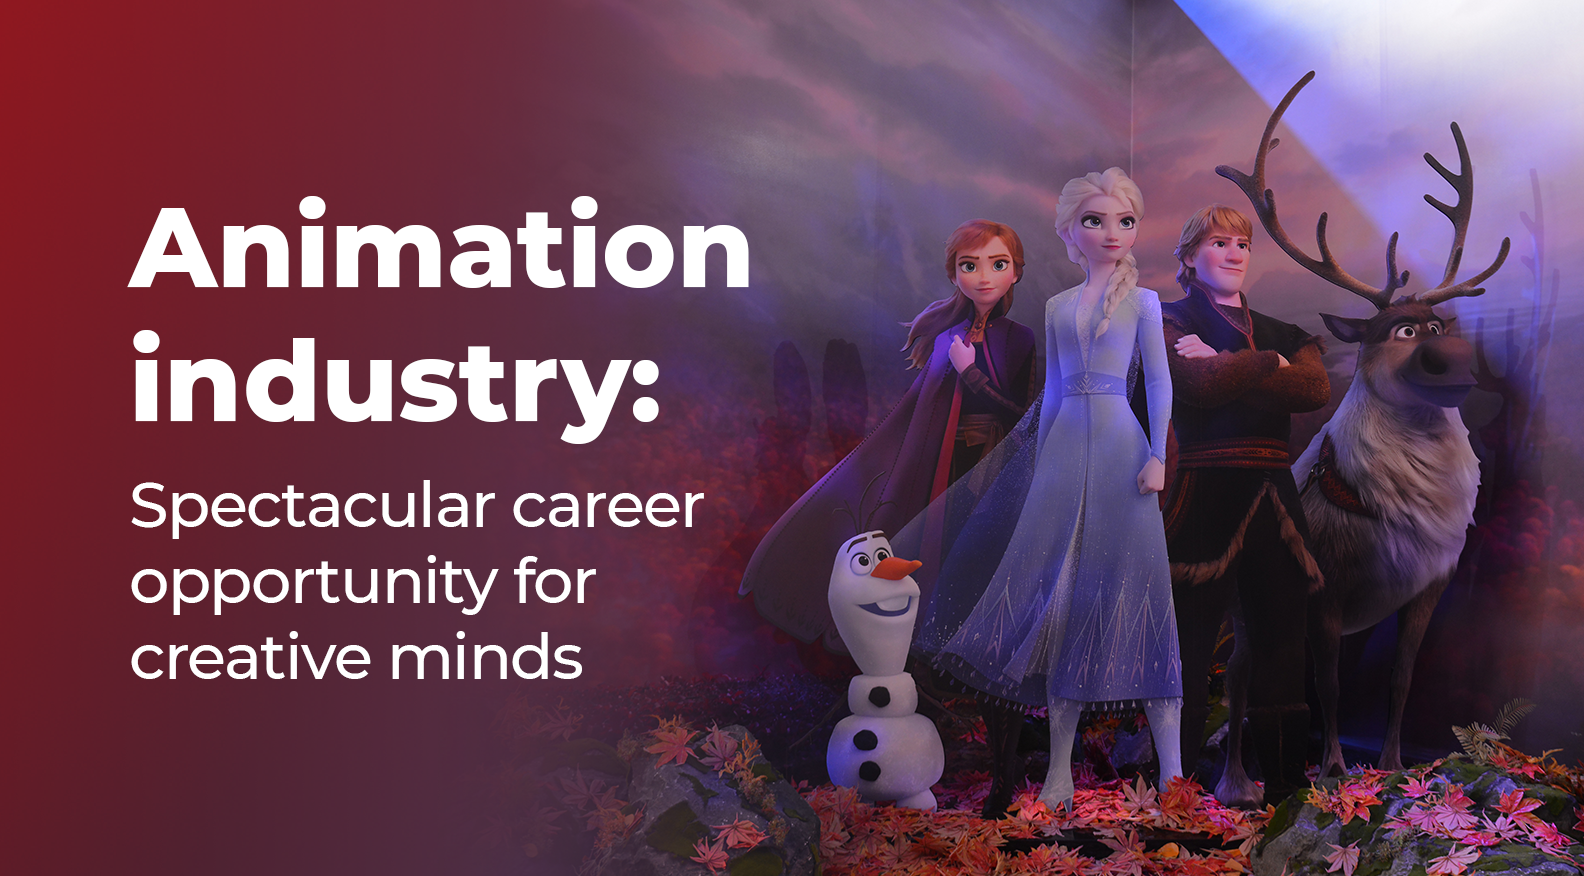 Animation industry: Spectacular career opportunity for creative minds